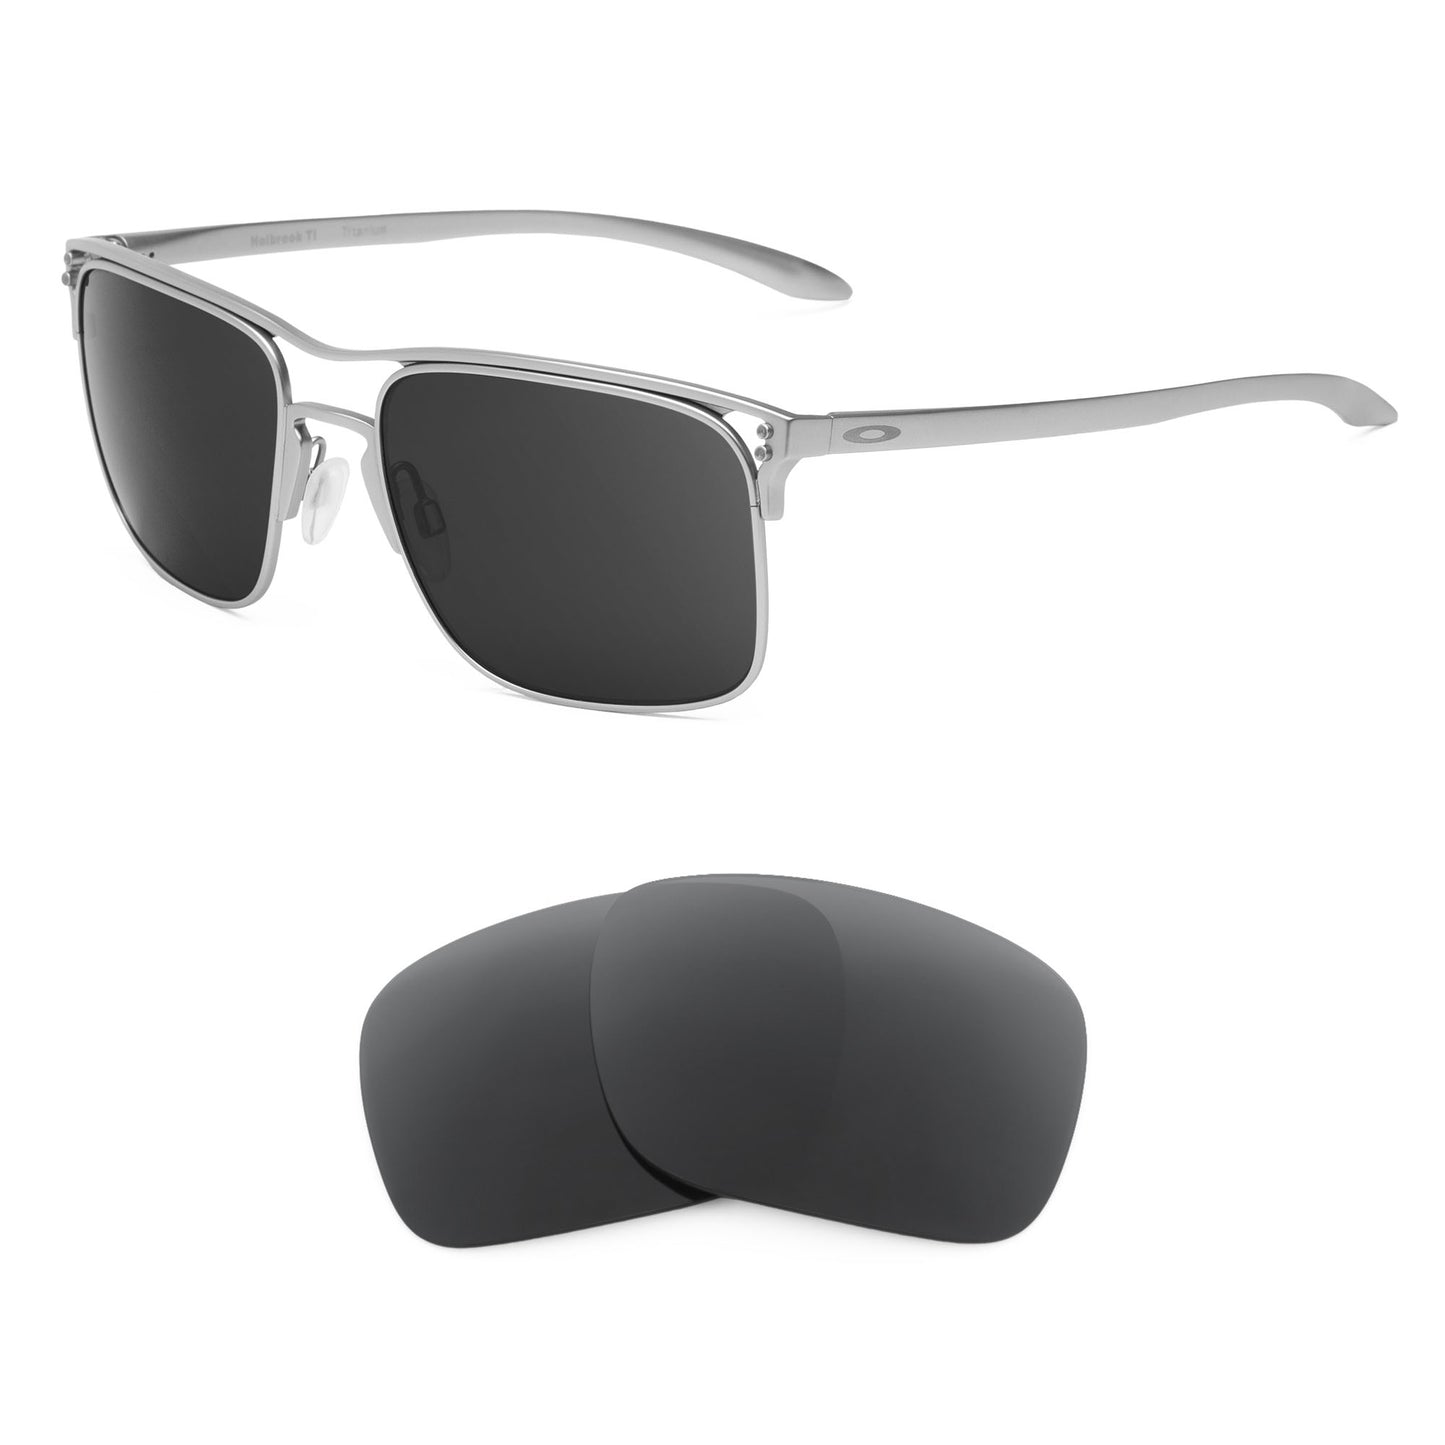 Oakley Holbrook Ti sunglasses with replacement lenses